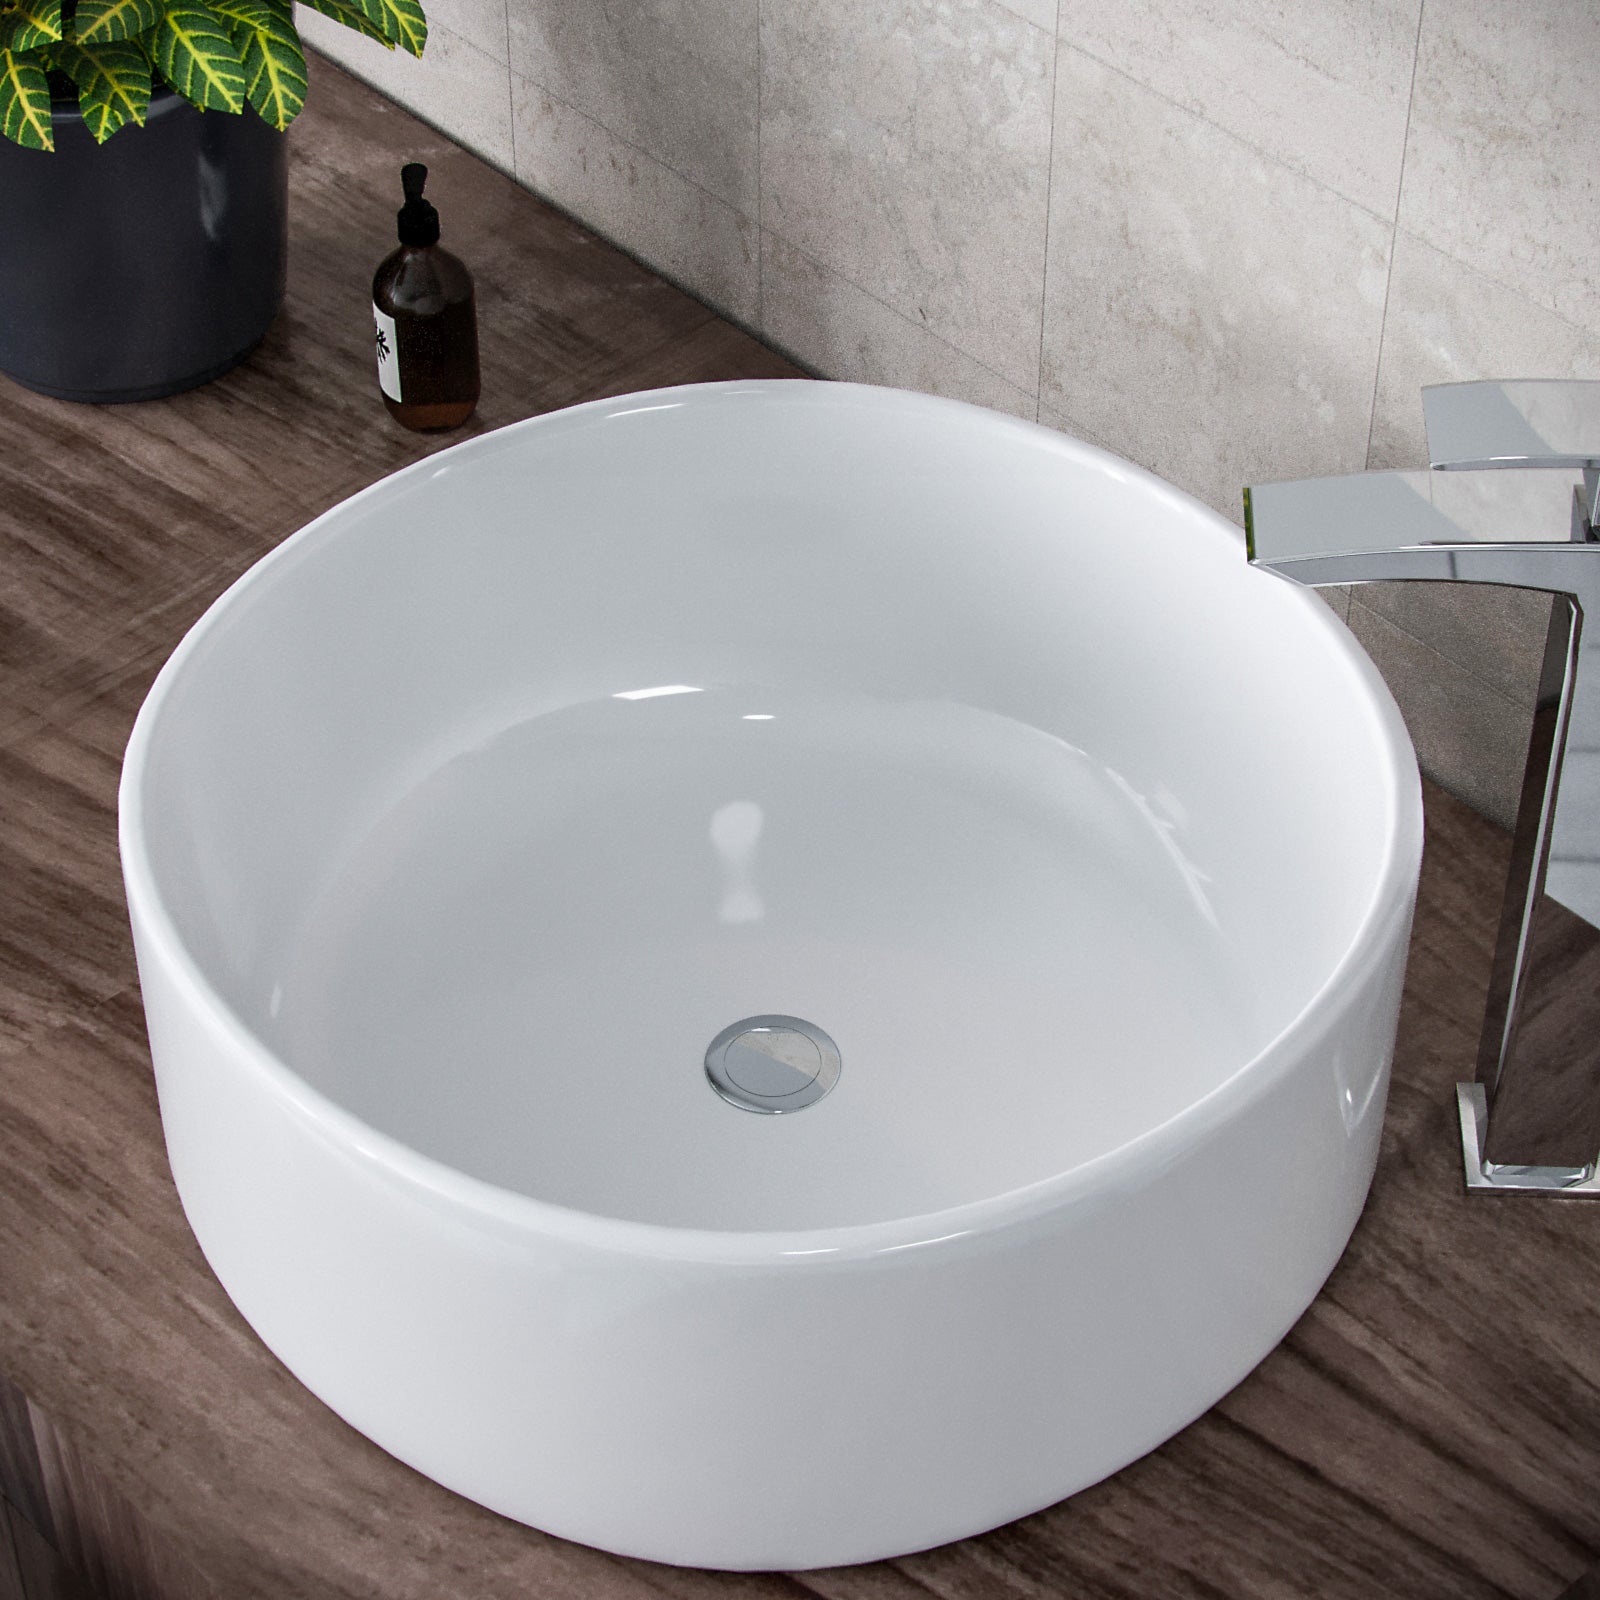 Etive 410mm Clokaroom Round Stand Alone Counter Top Basin Sink Bowl